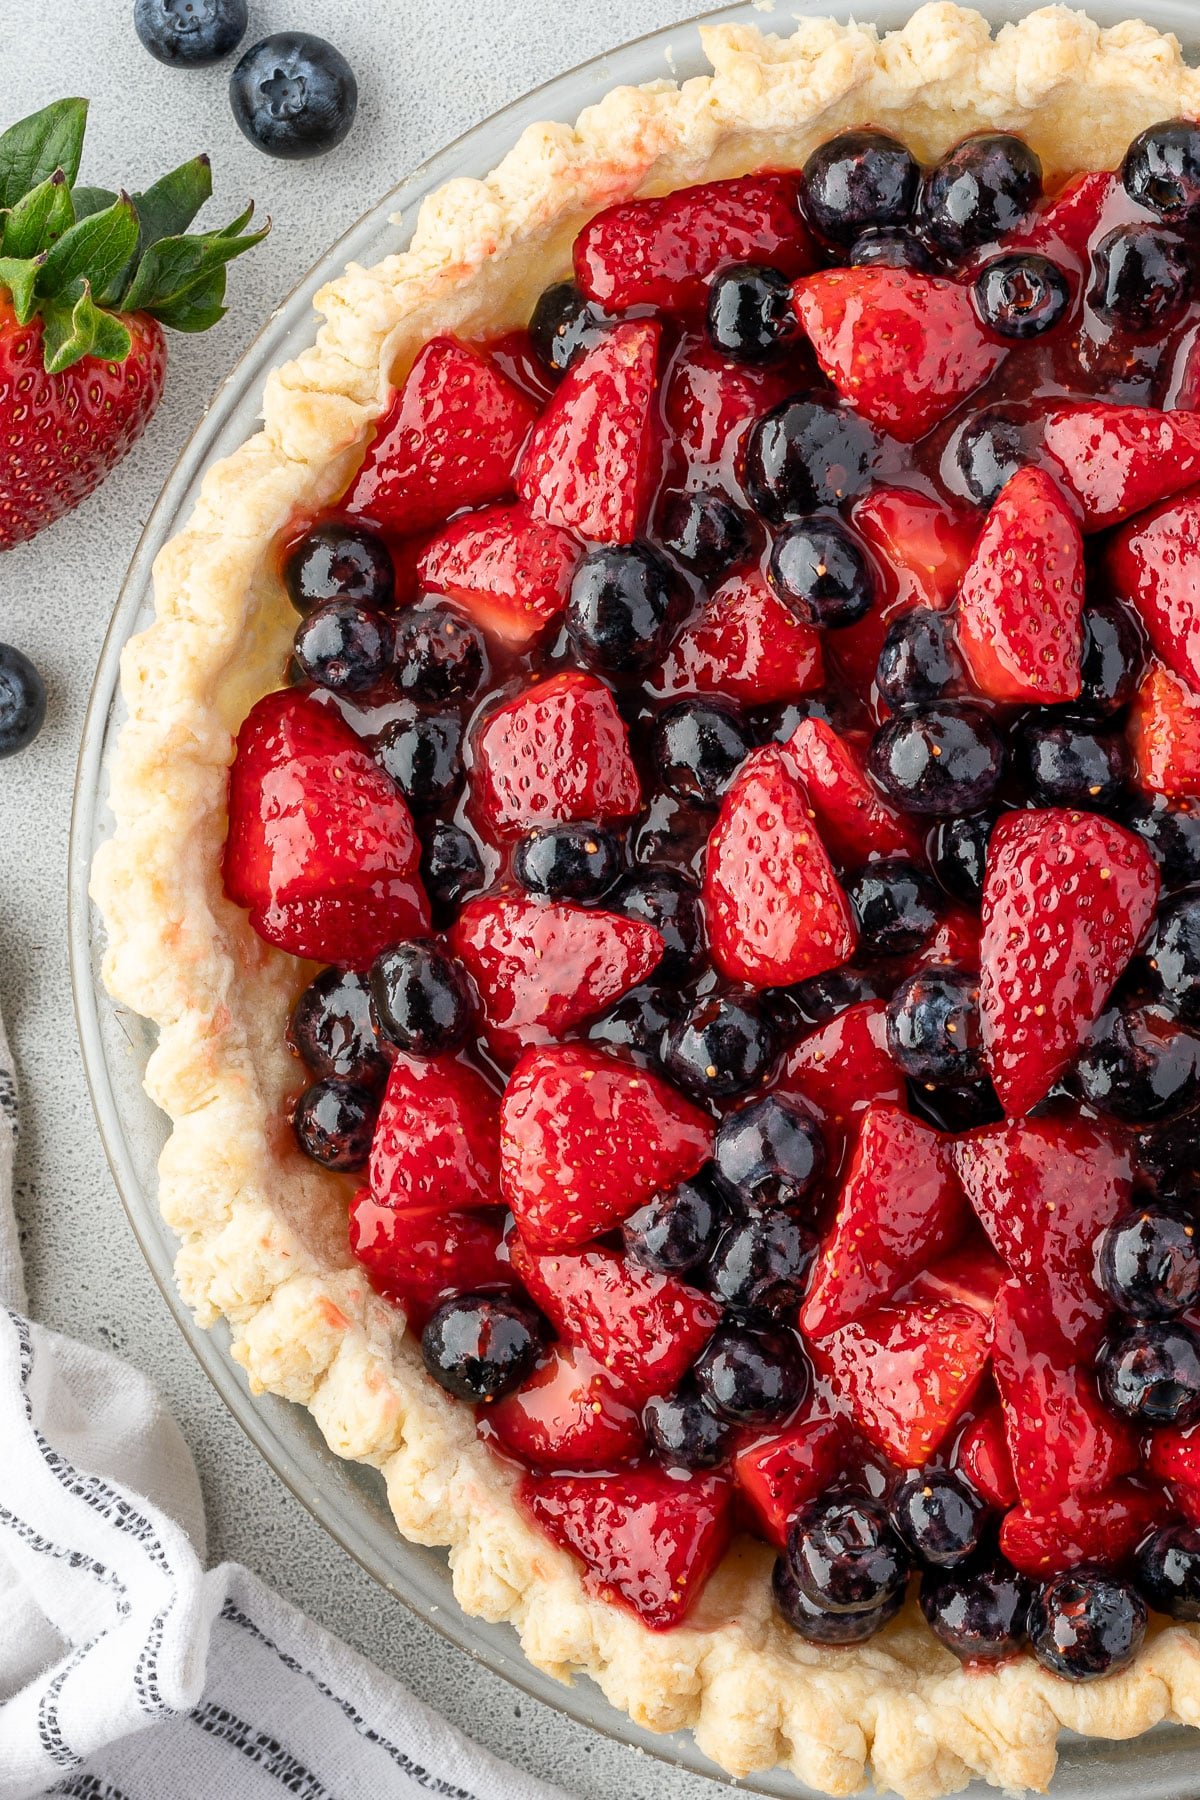 Close-up of a fresh strawberry and blueberry pie with glossy fruit in a flaky crust, with a linen beside it.